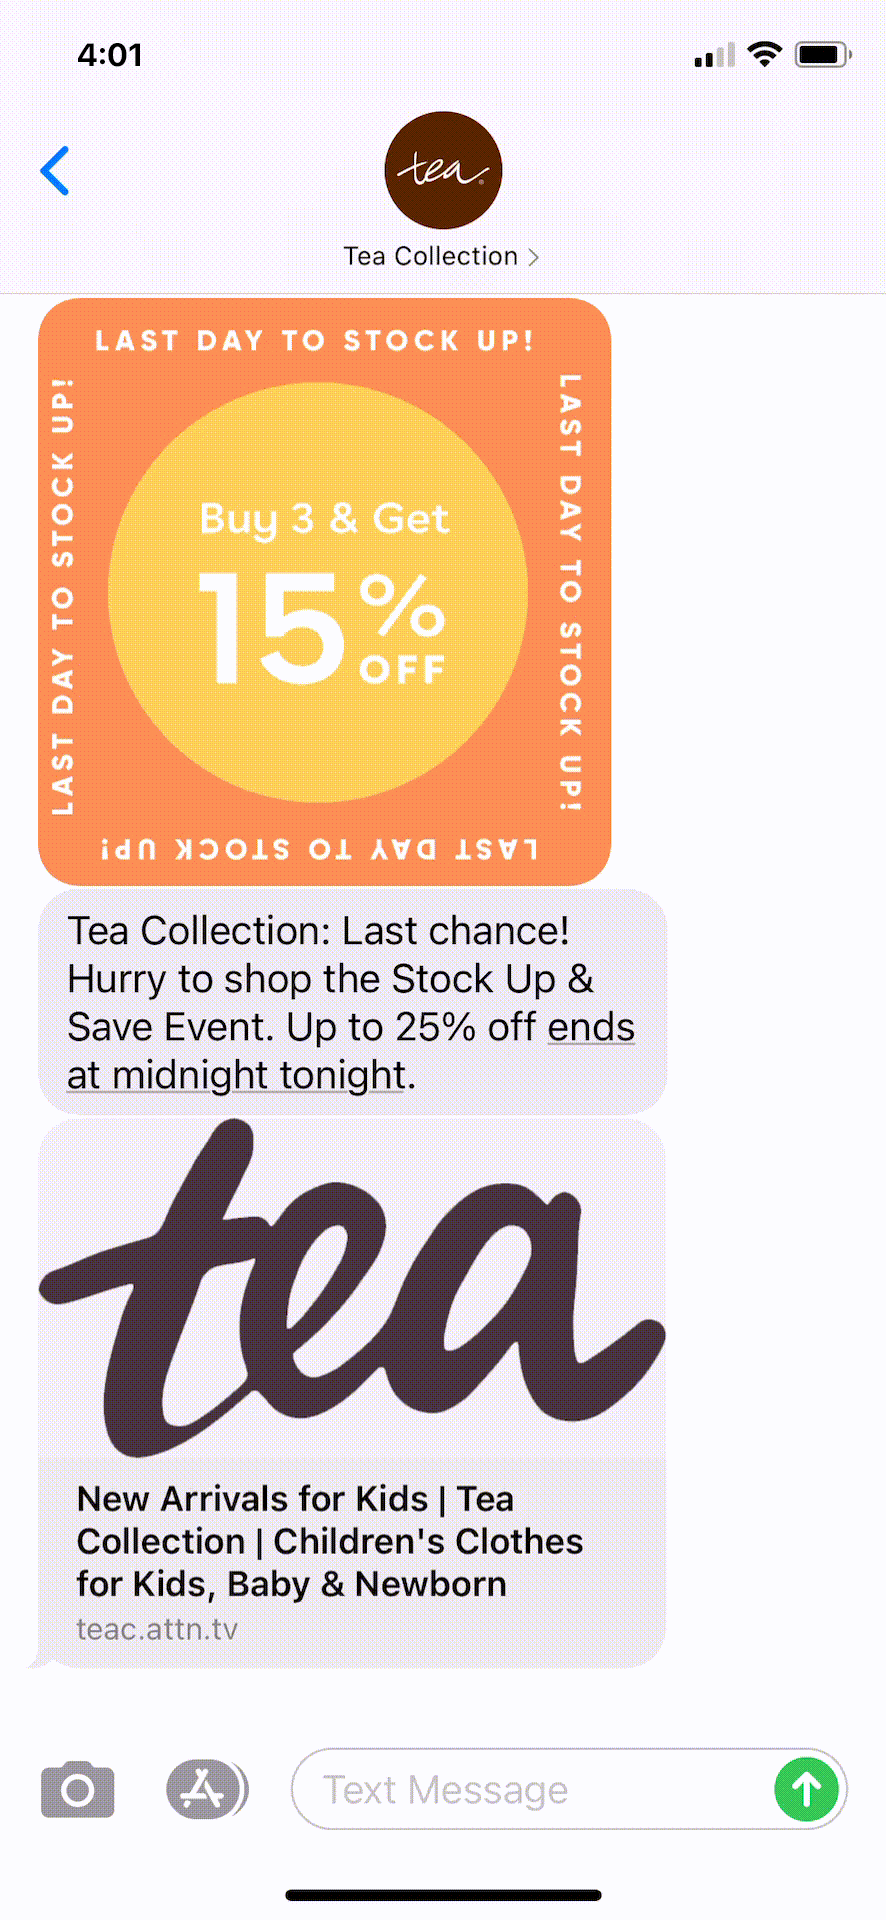 Tea-Collection-Text-Message-Marketing-Example-04.01.2021